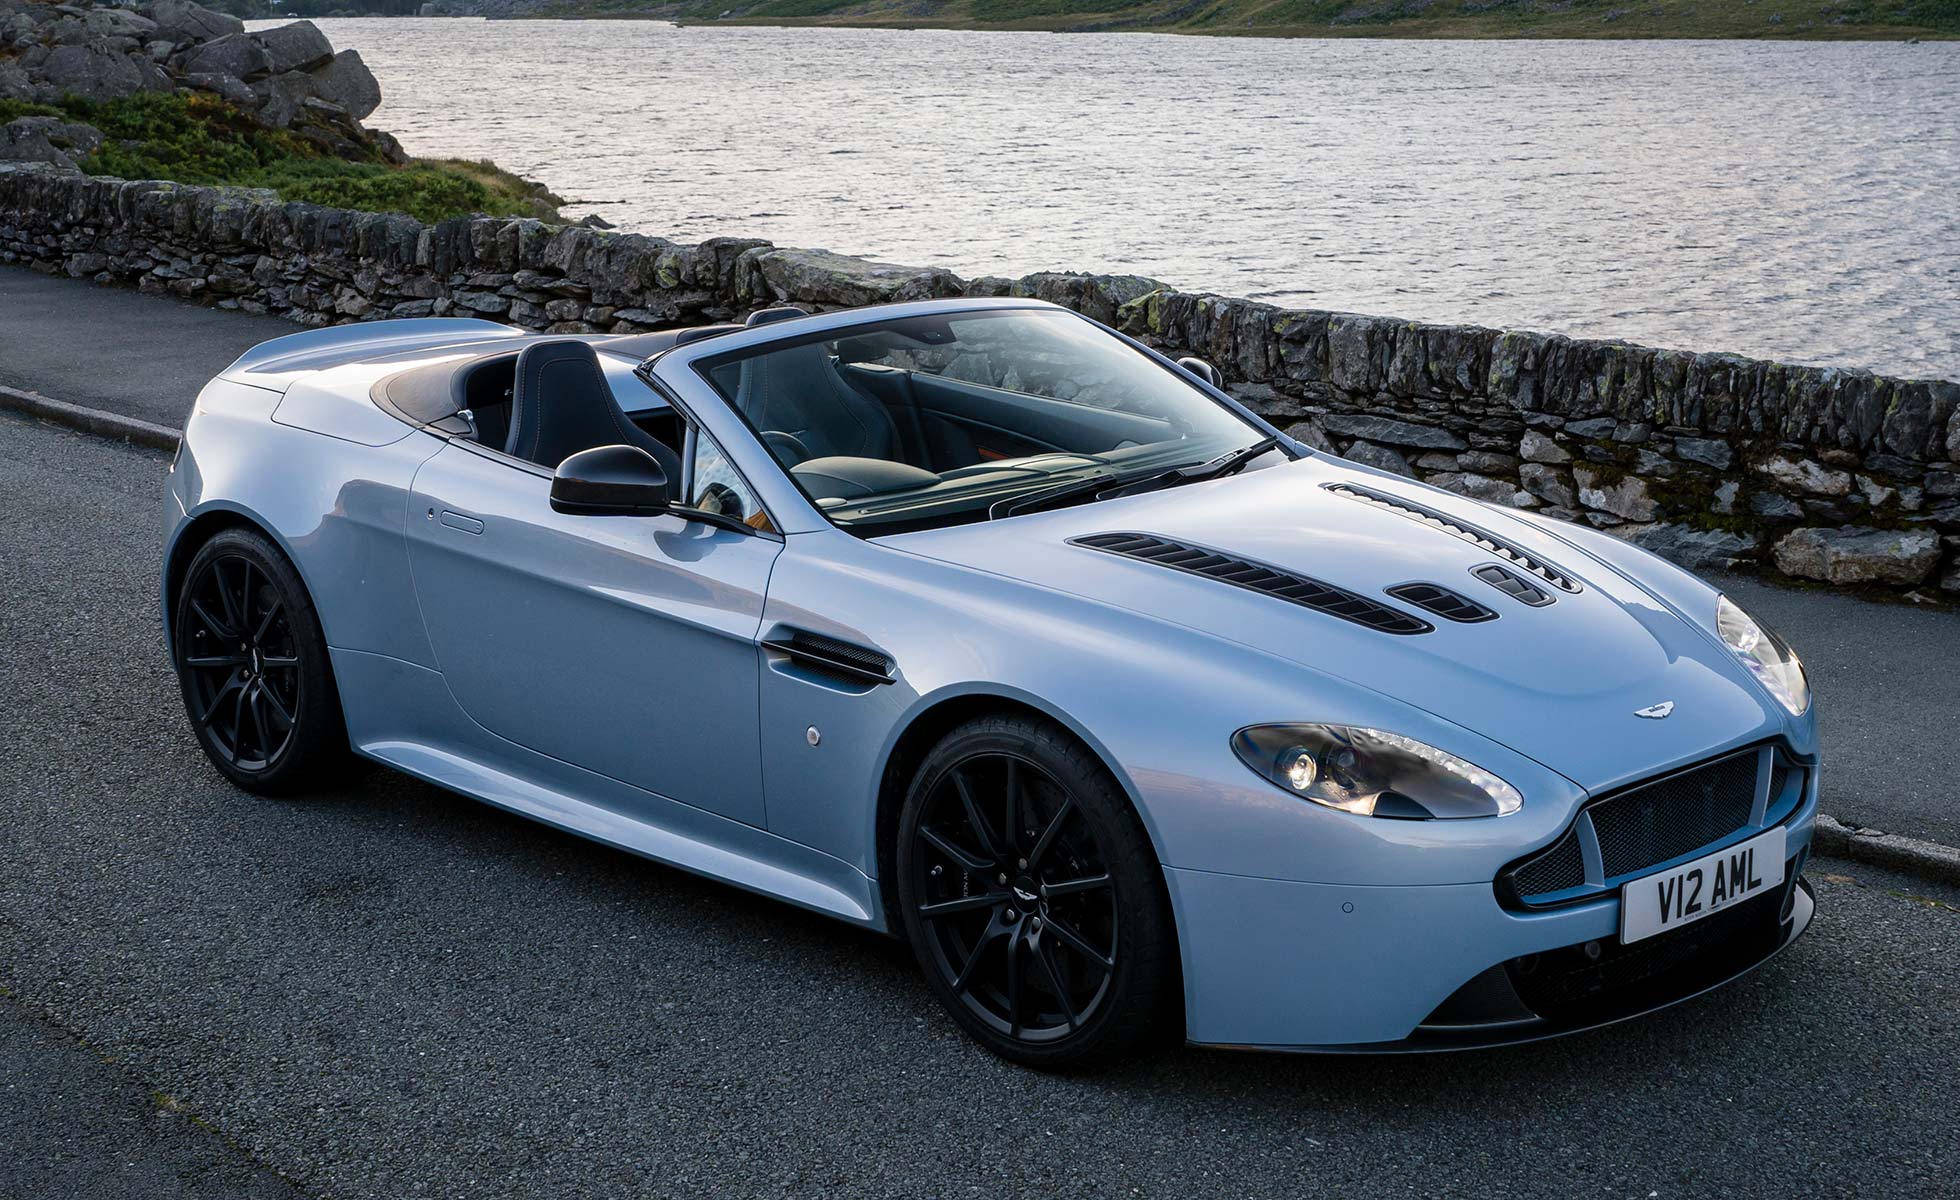 The Power And Elegance Of Aston Martin: The 2014 V12 Vantage S